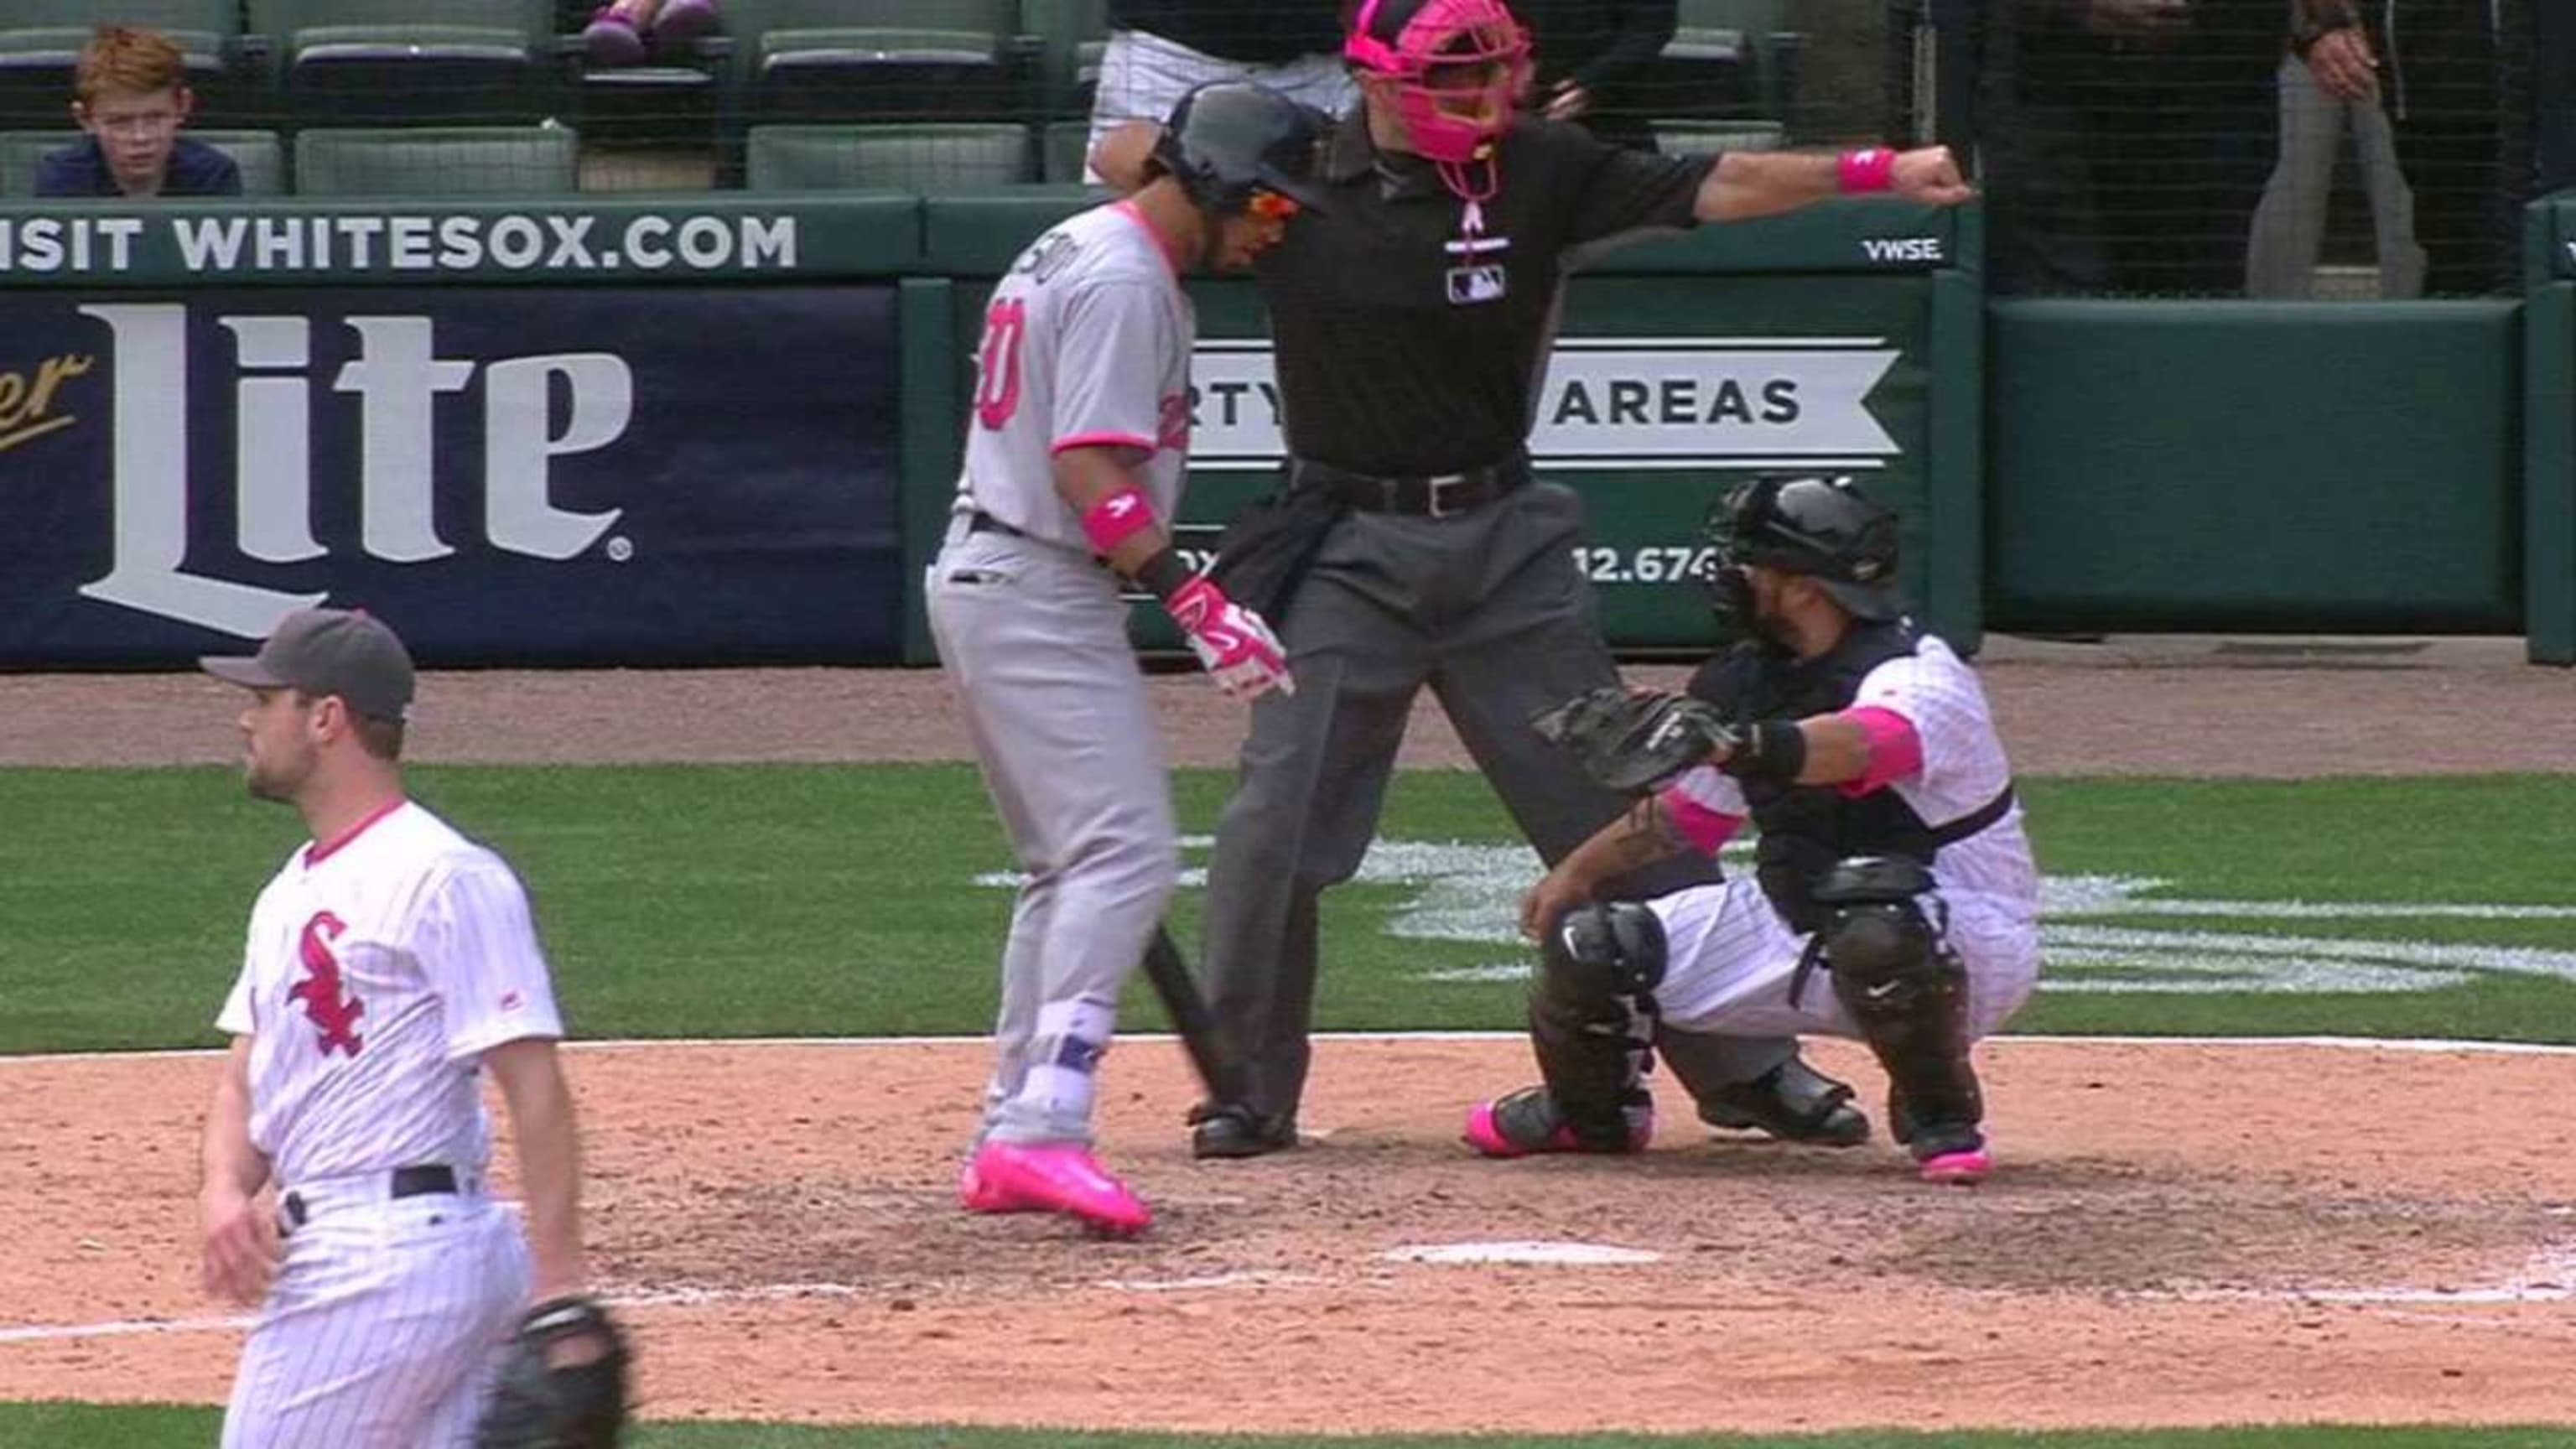 White Sox honored to wear pink on Mother's Day